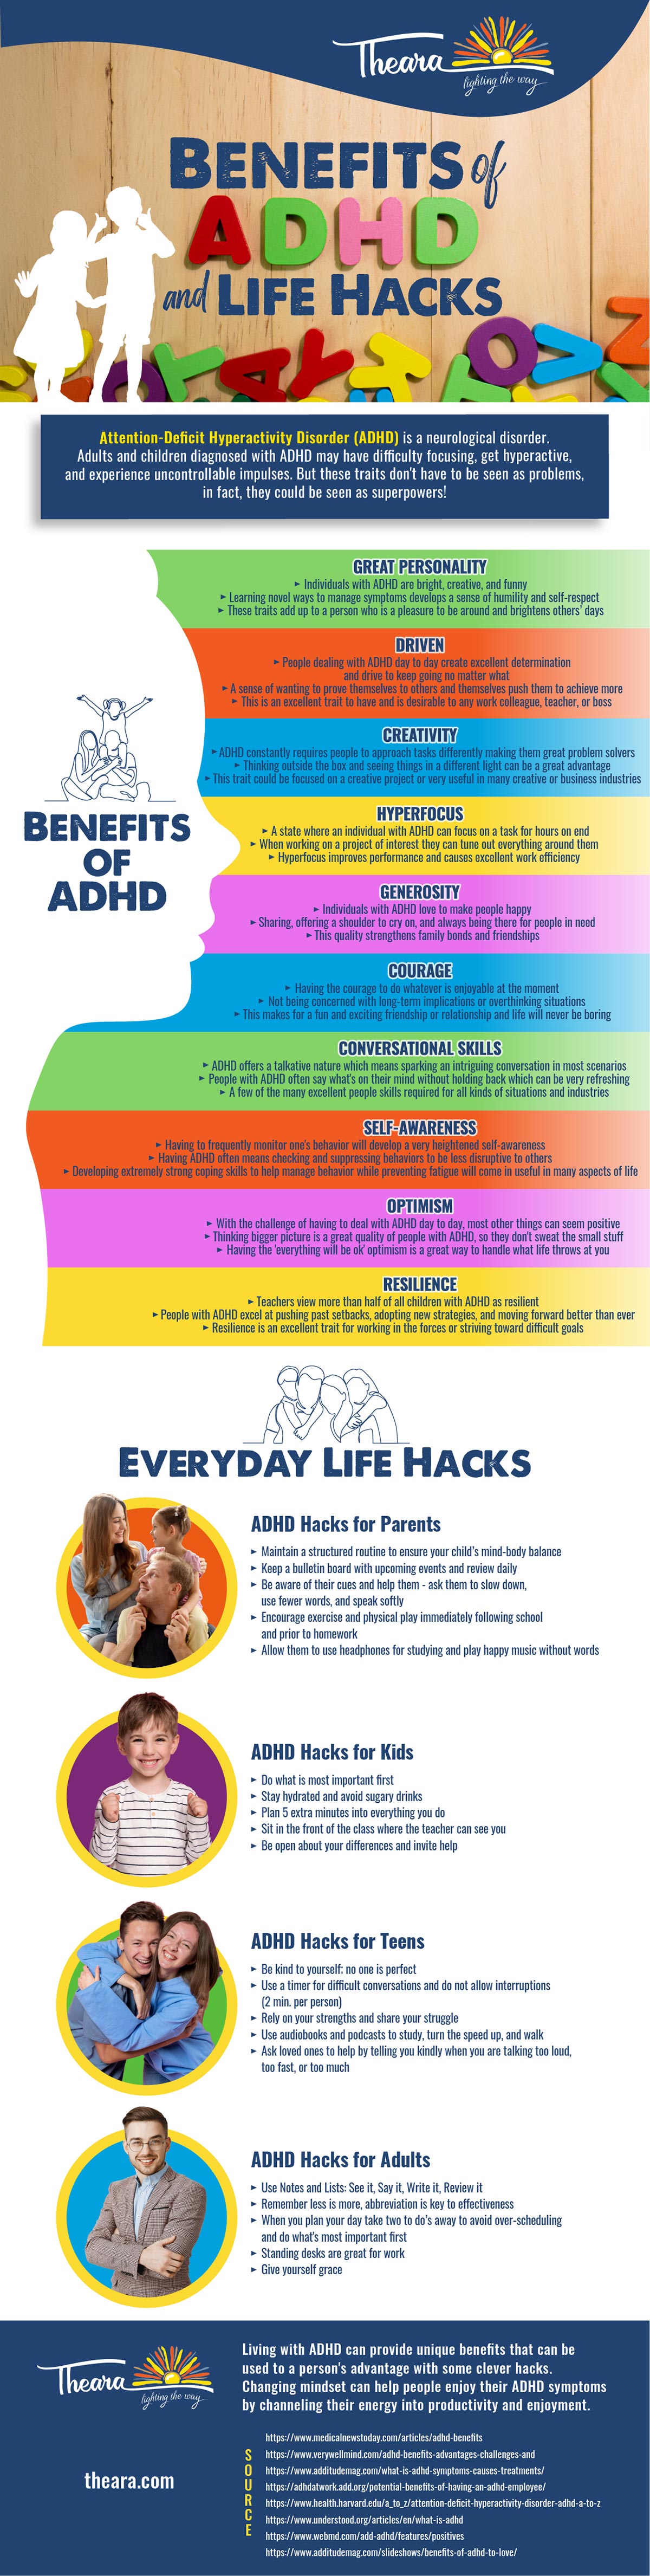 The Benefits of ADHD and Everyday Life Hacks